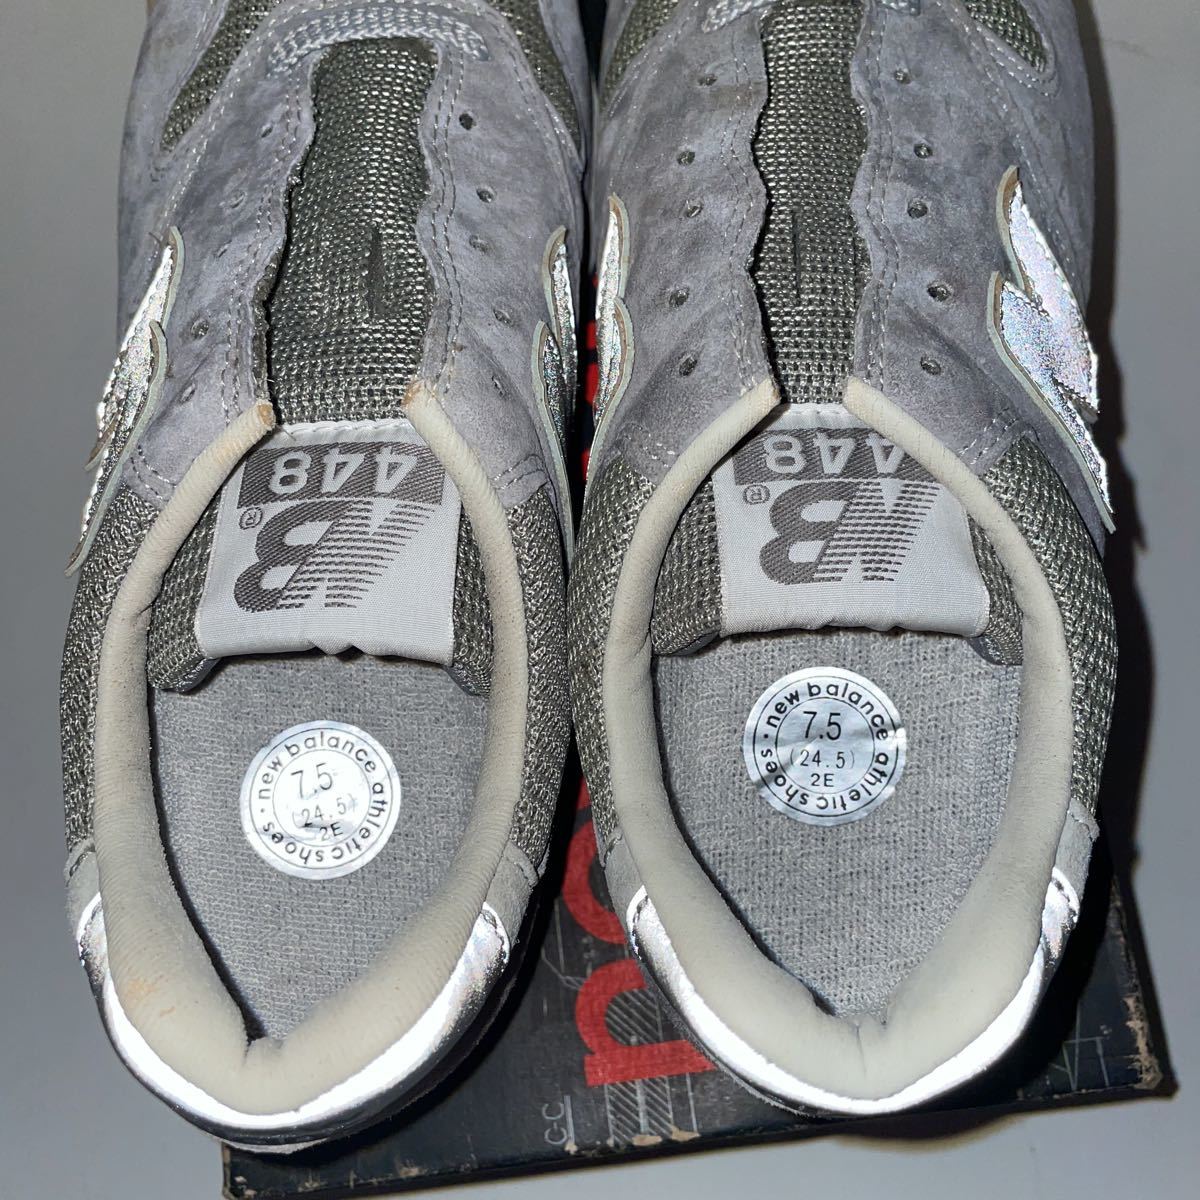 *New Balance/ New balance #W448#7.5/24.5cm# dead stock # gray #93 year made # running / sneakers # Vintage *